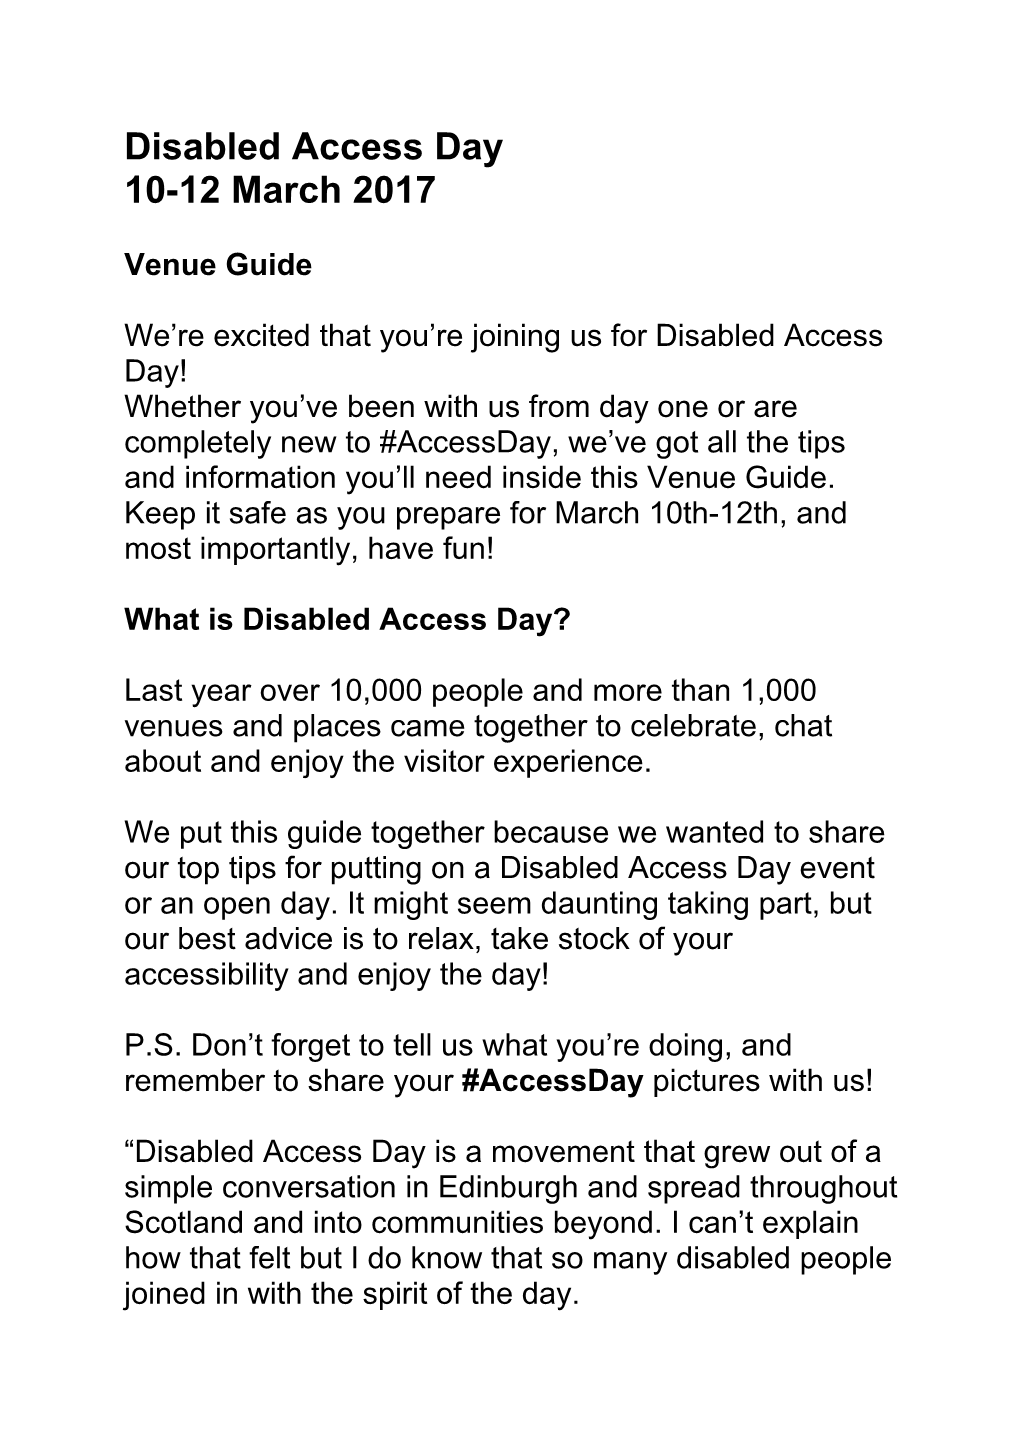 What Is Disabled Access Day?